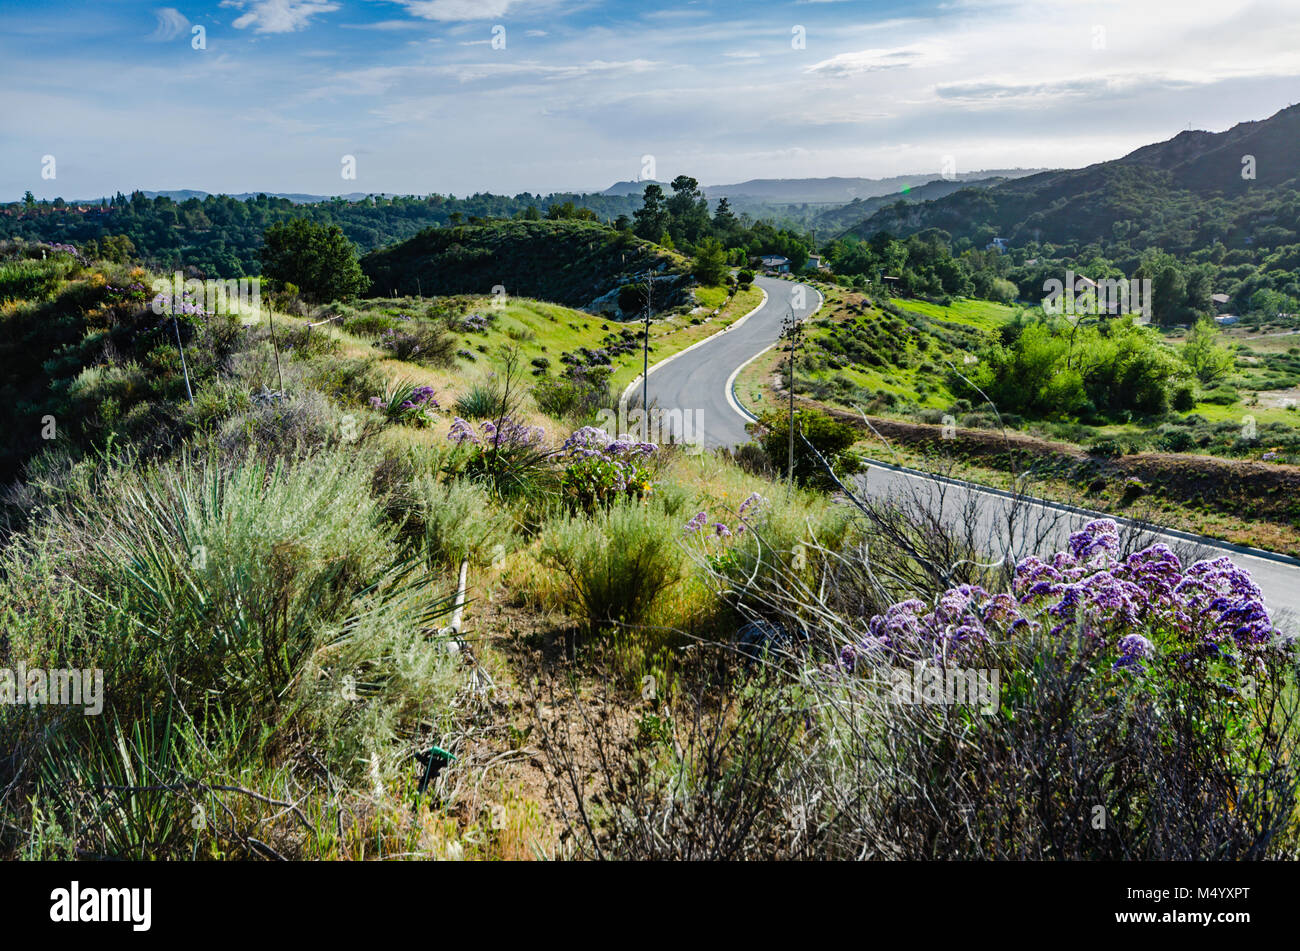 Winding asphalt road amidst spring blooms on green hills, canyons, and mountains in Orange County, California. Stock Photo